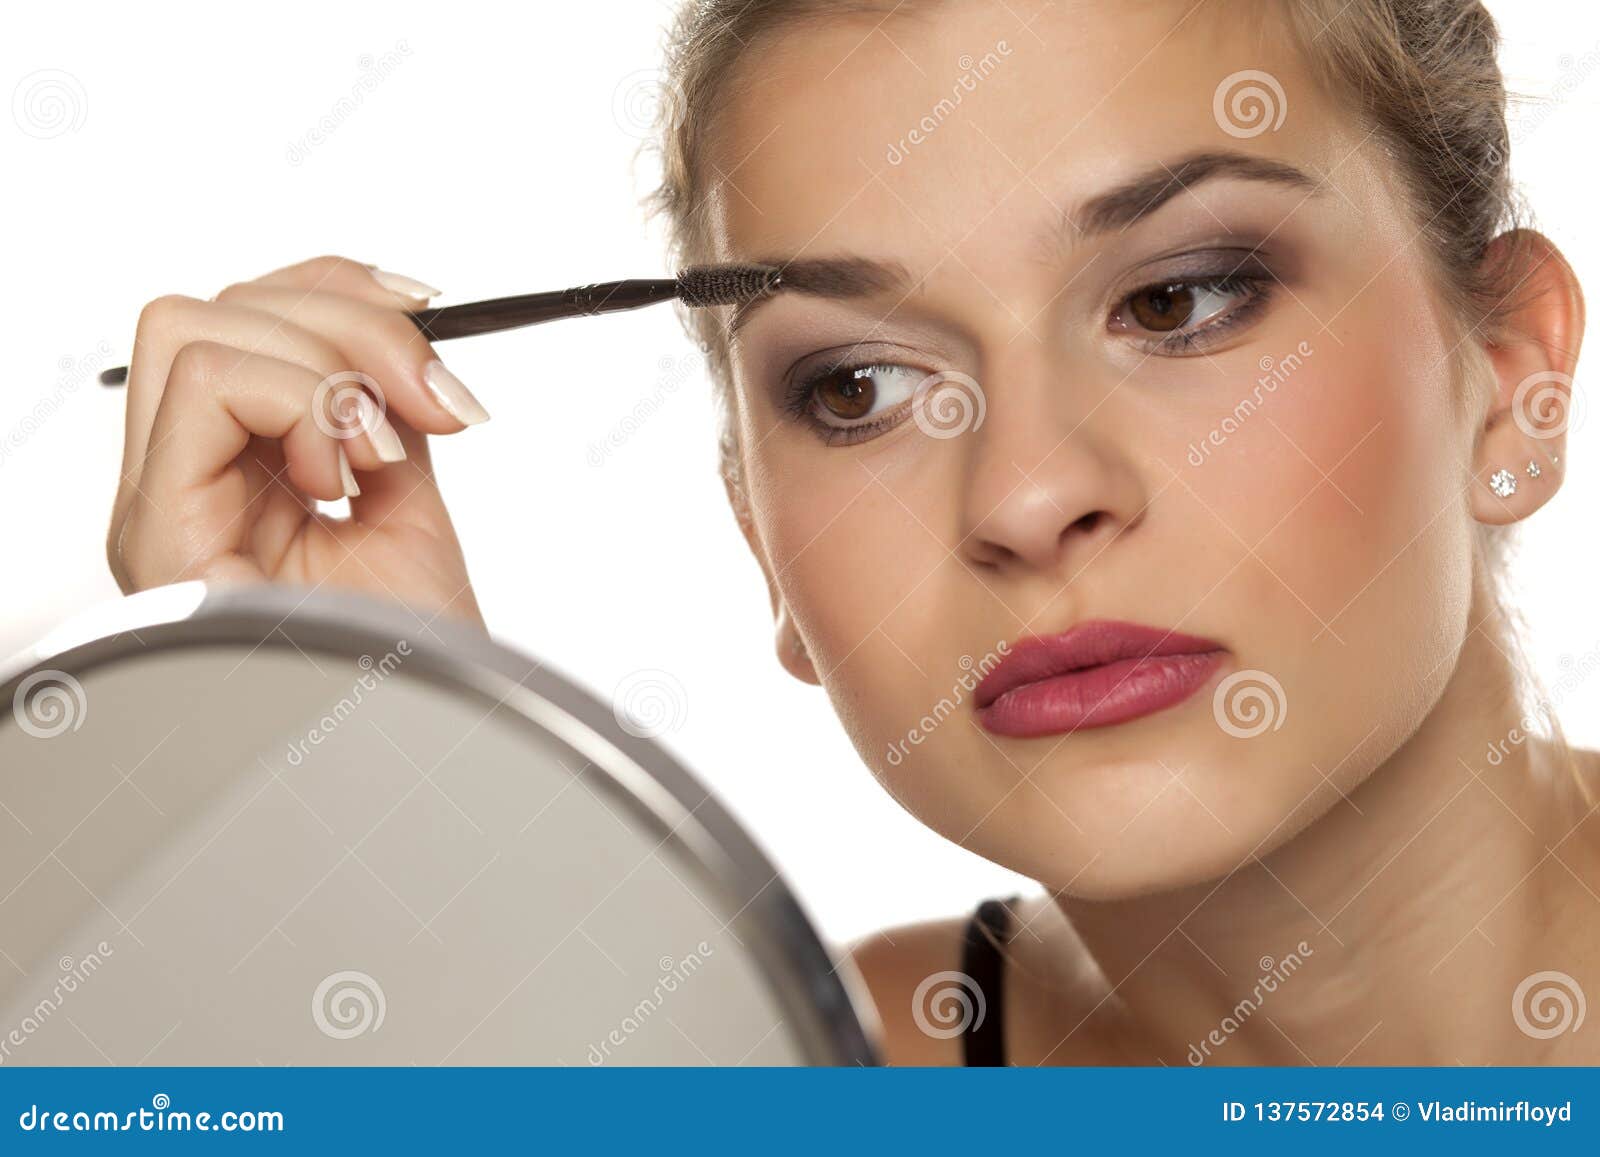 Eyebrows shaping stock photo Image of brows combing  137572854